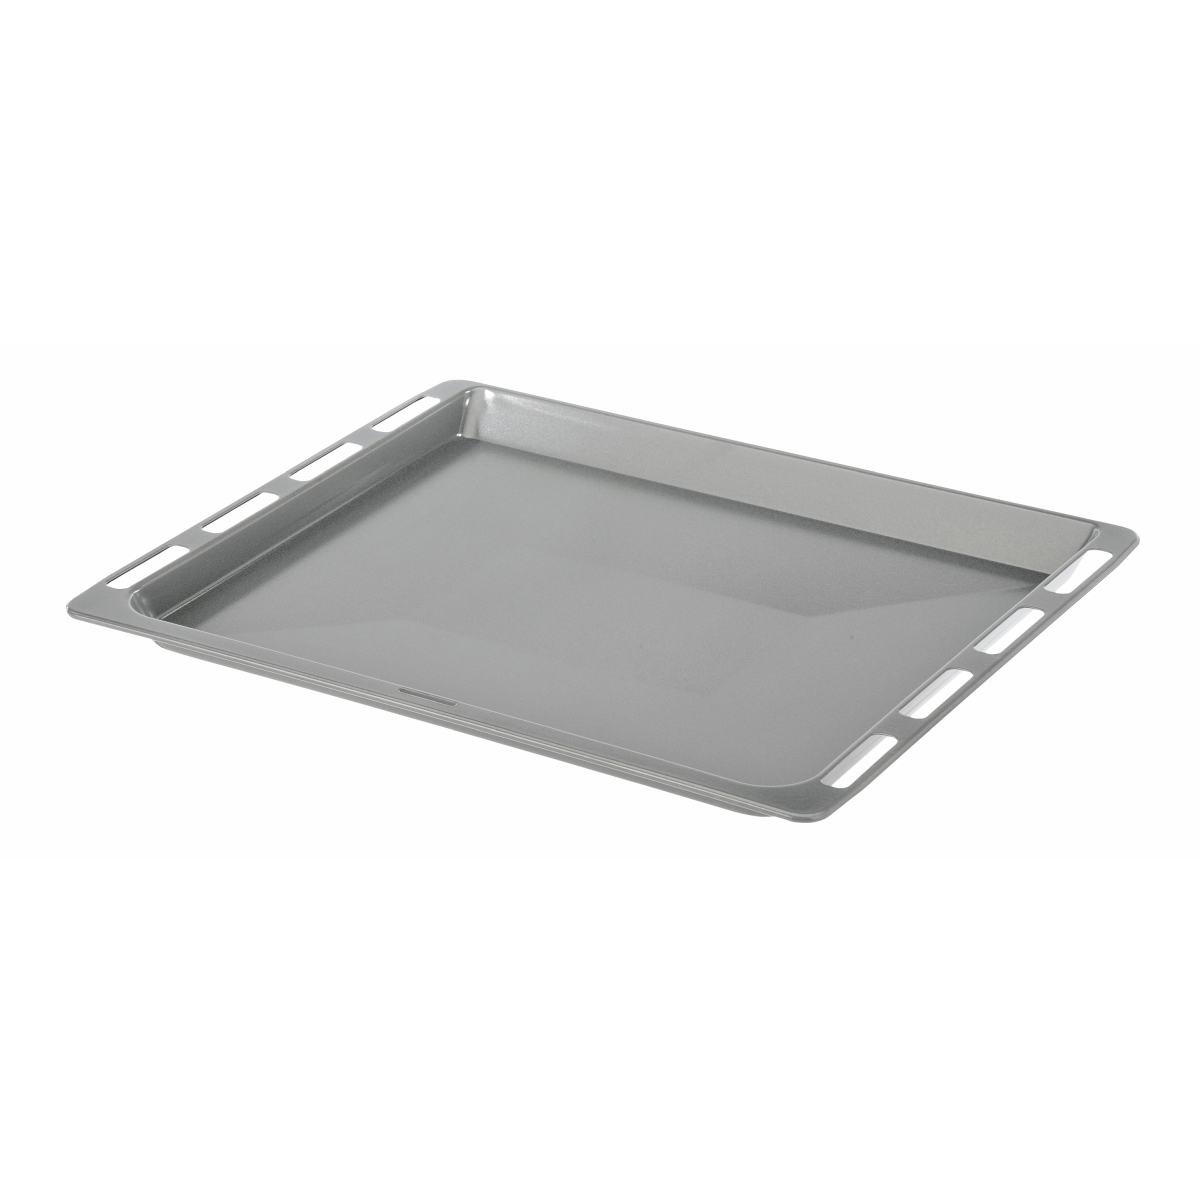 Bakeplate 465 x 375 x 29 mm